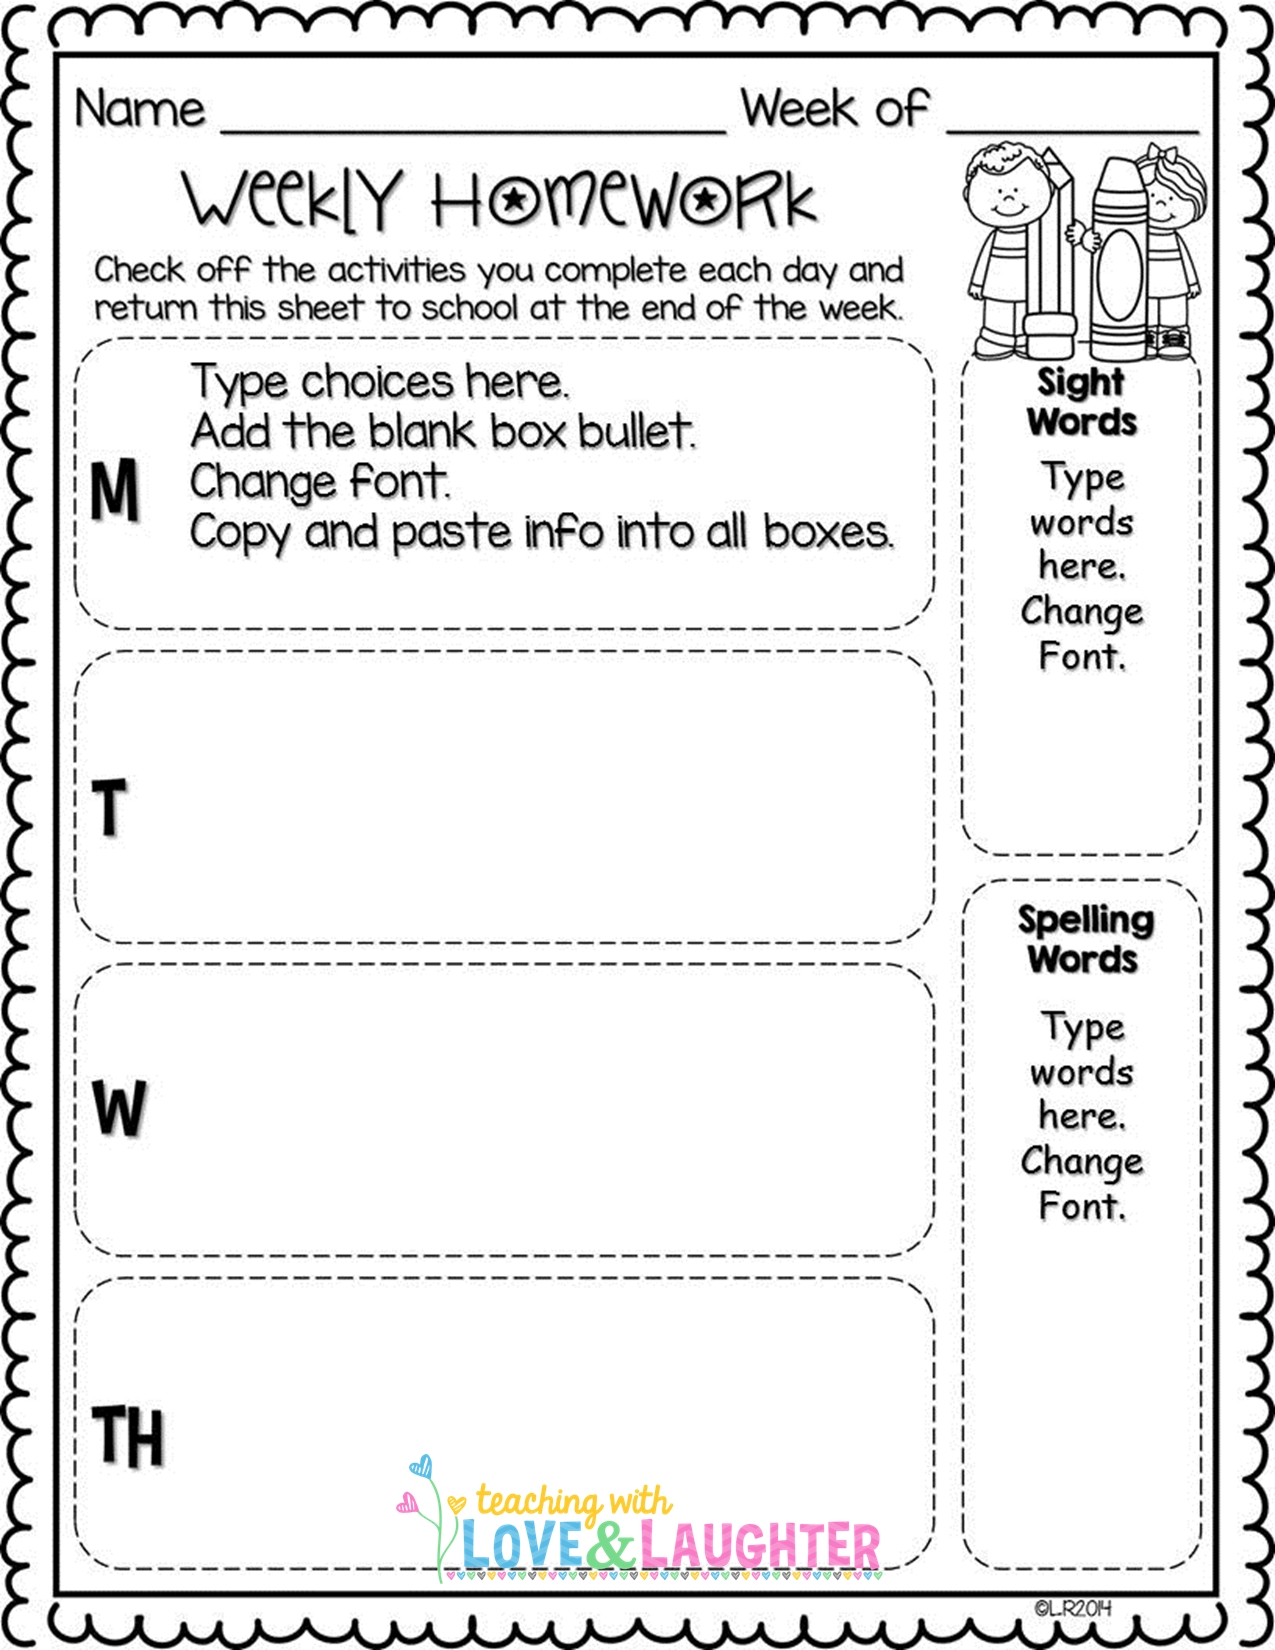 editable weekly homework checklists like the layout, but